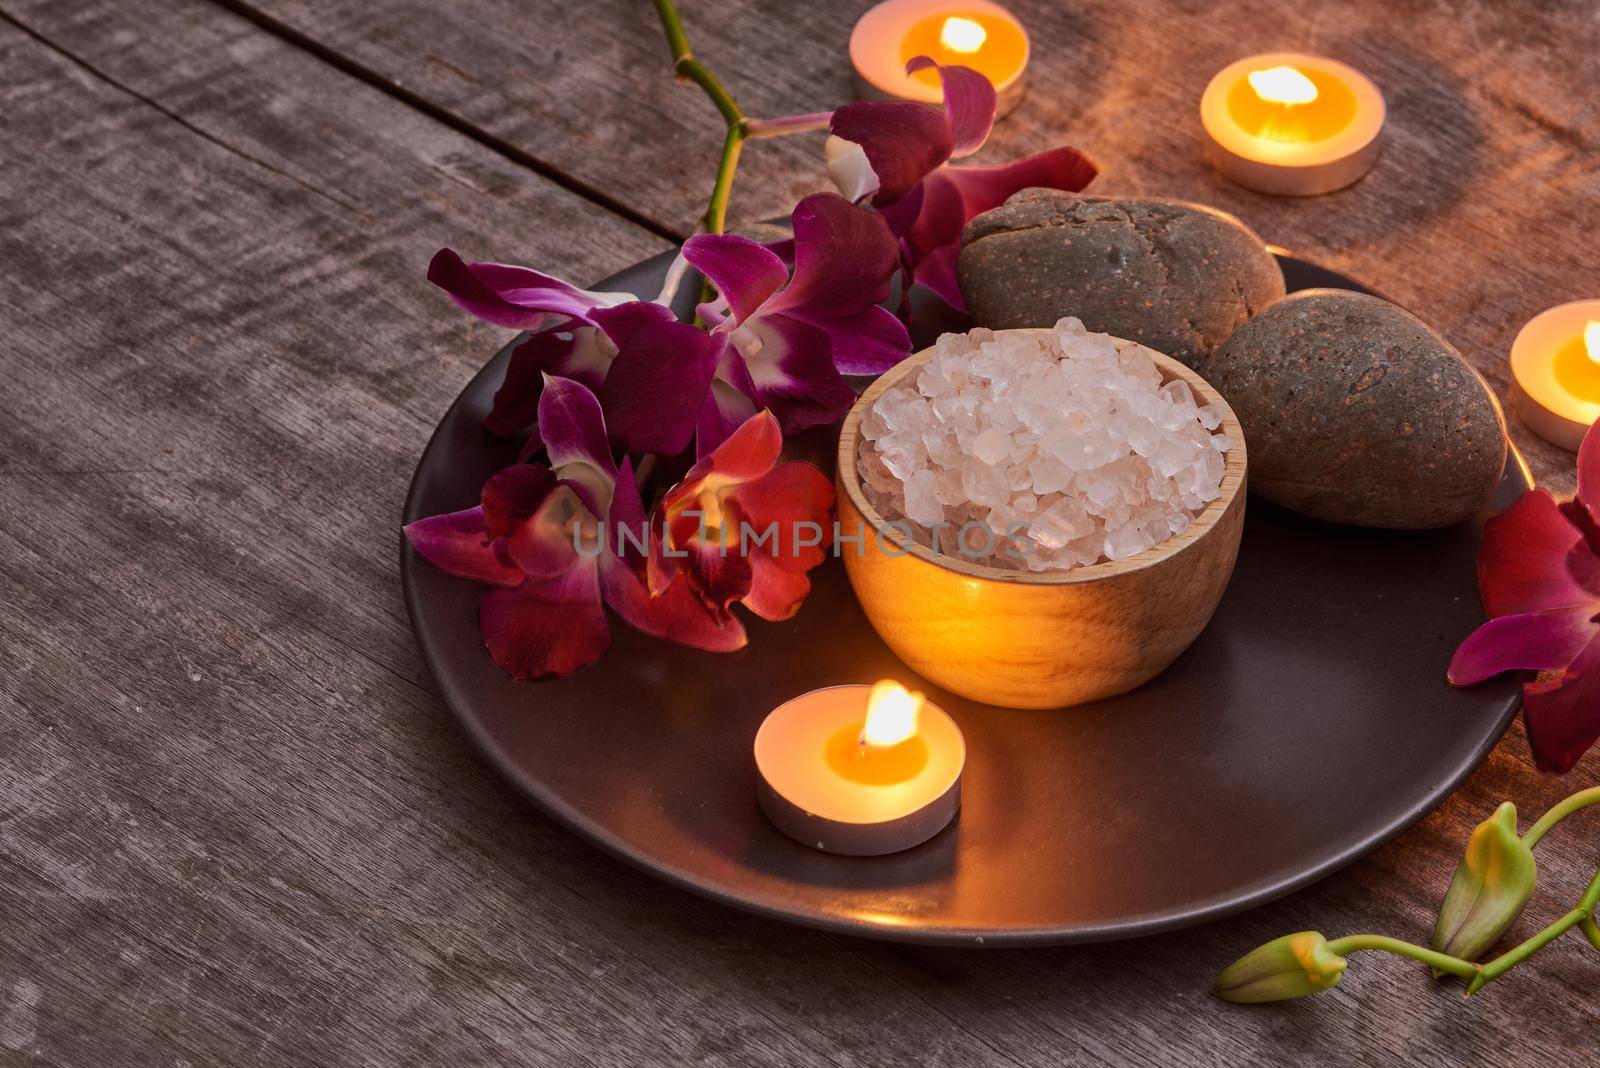 bath salt at bamboo bowl and orchids flowers on dark wood